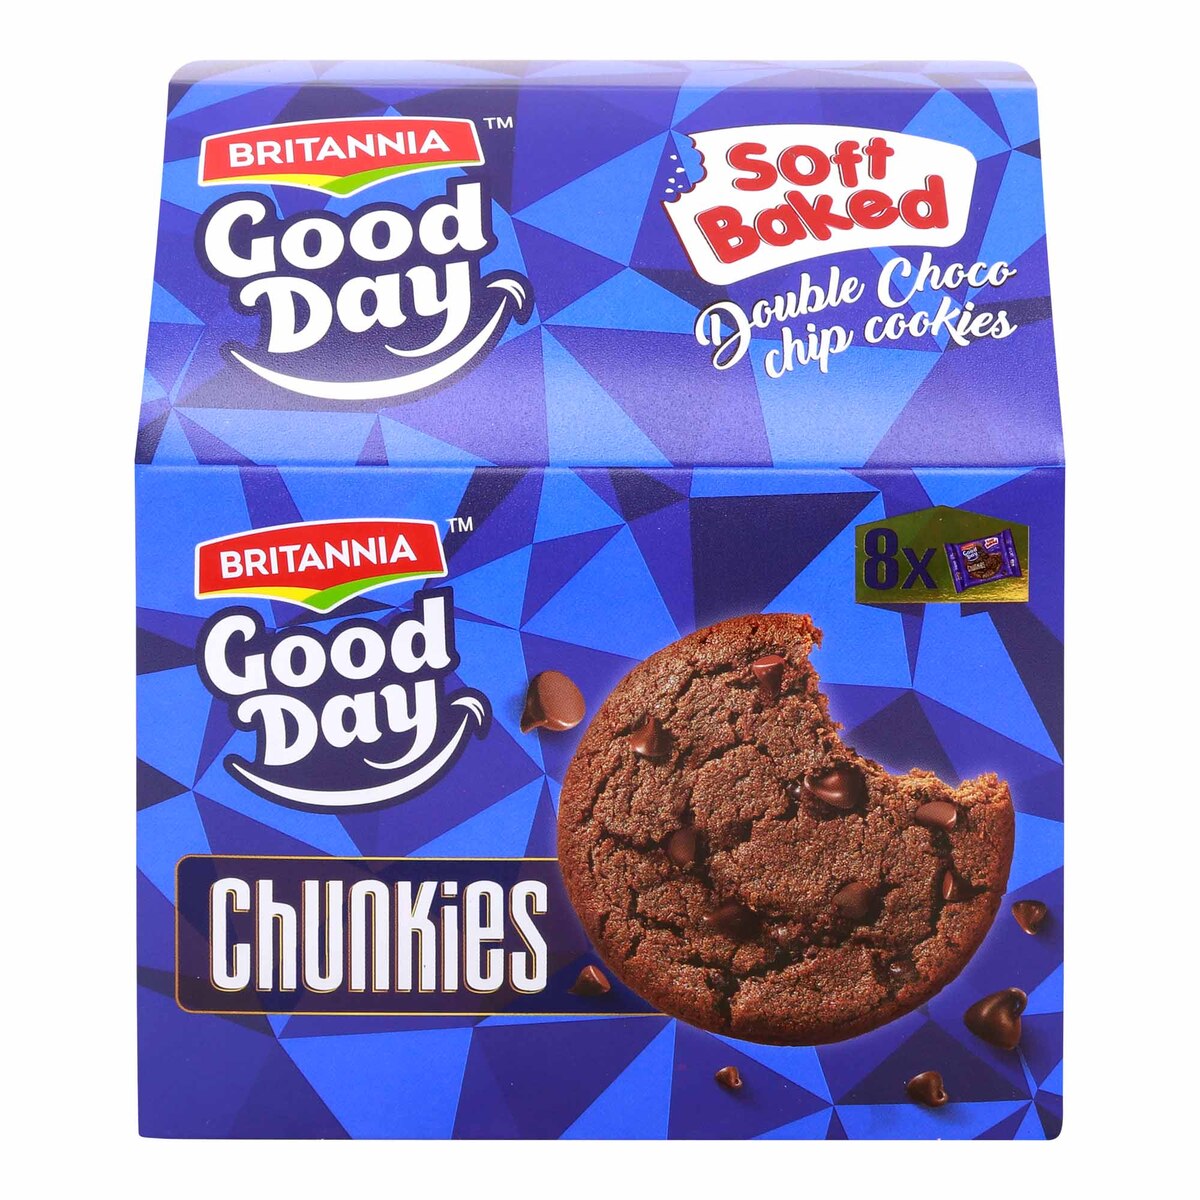 Britannia Good Day Soft Baked Double Choco Chip Cookies, 8 x 28 g